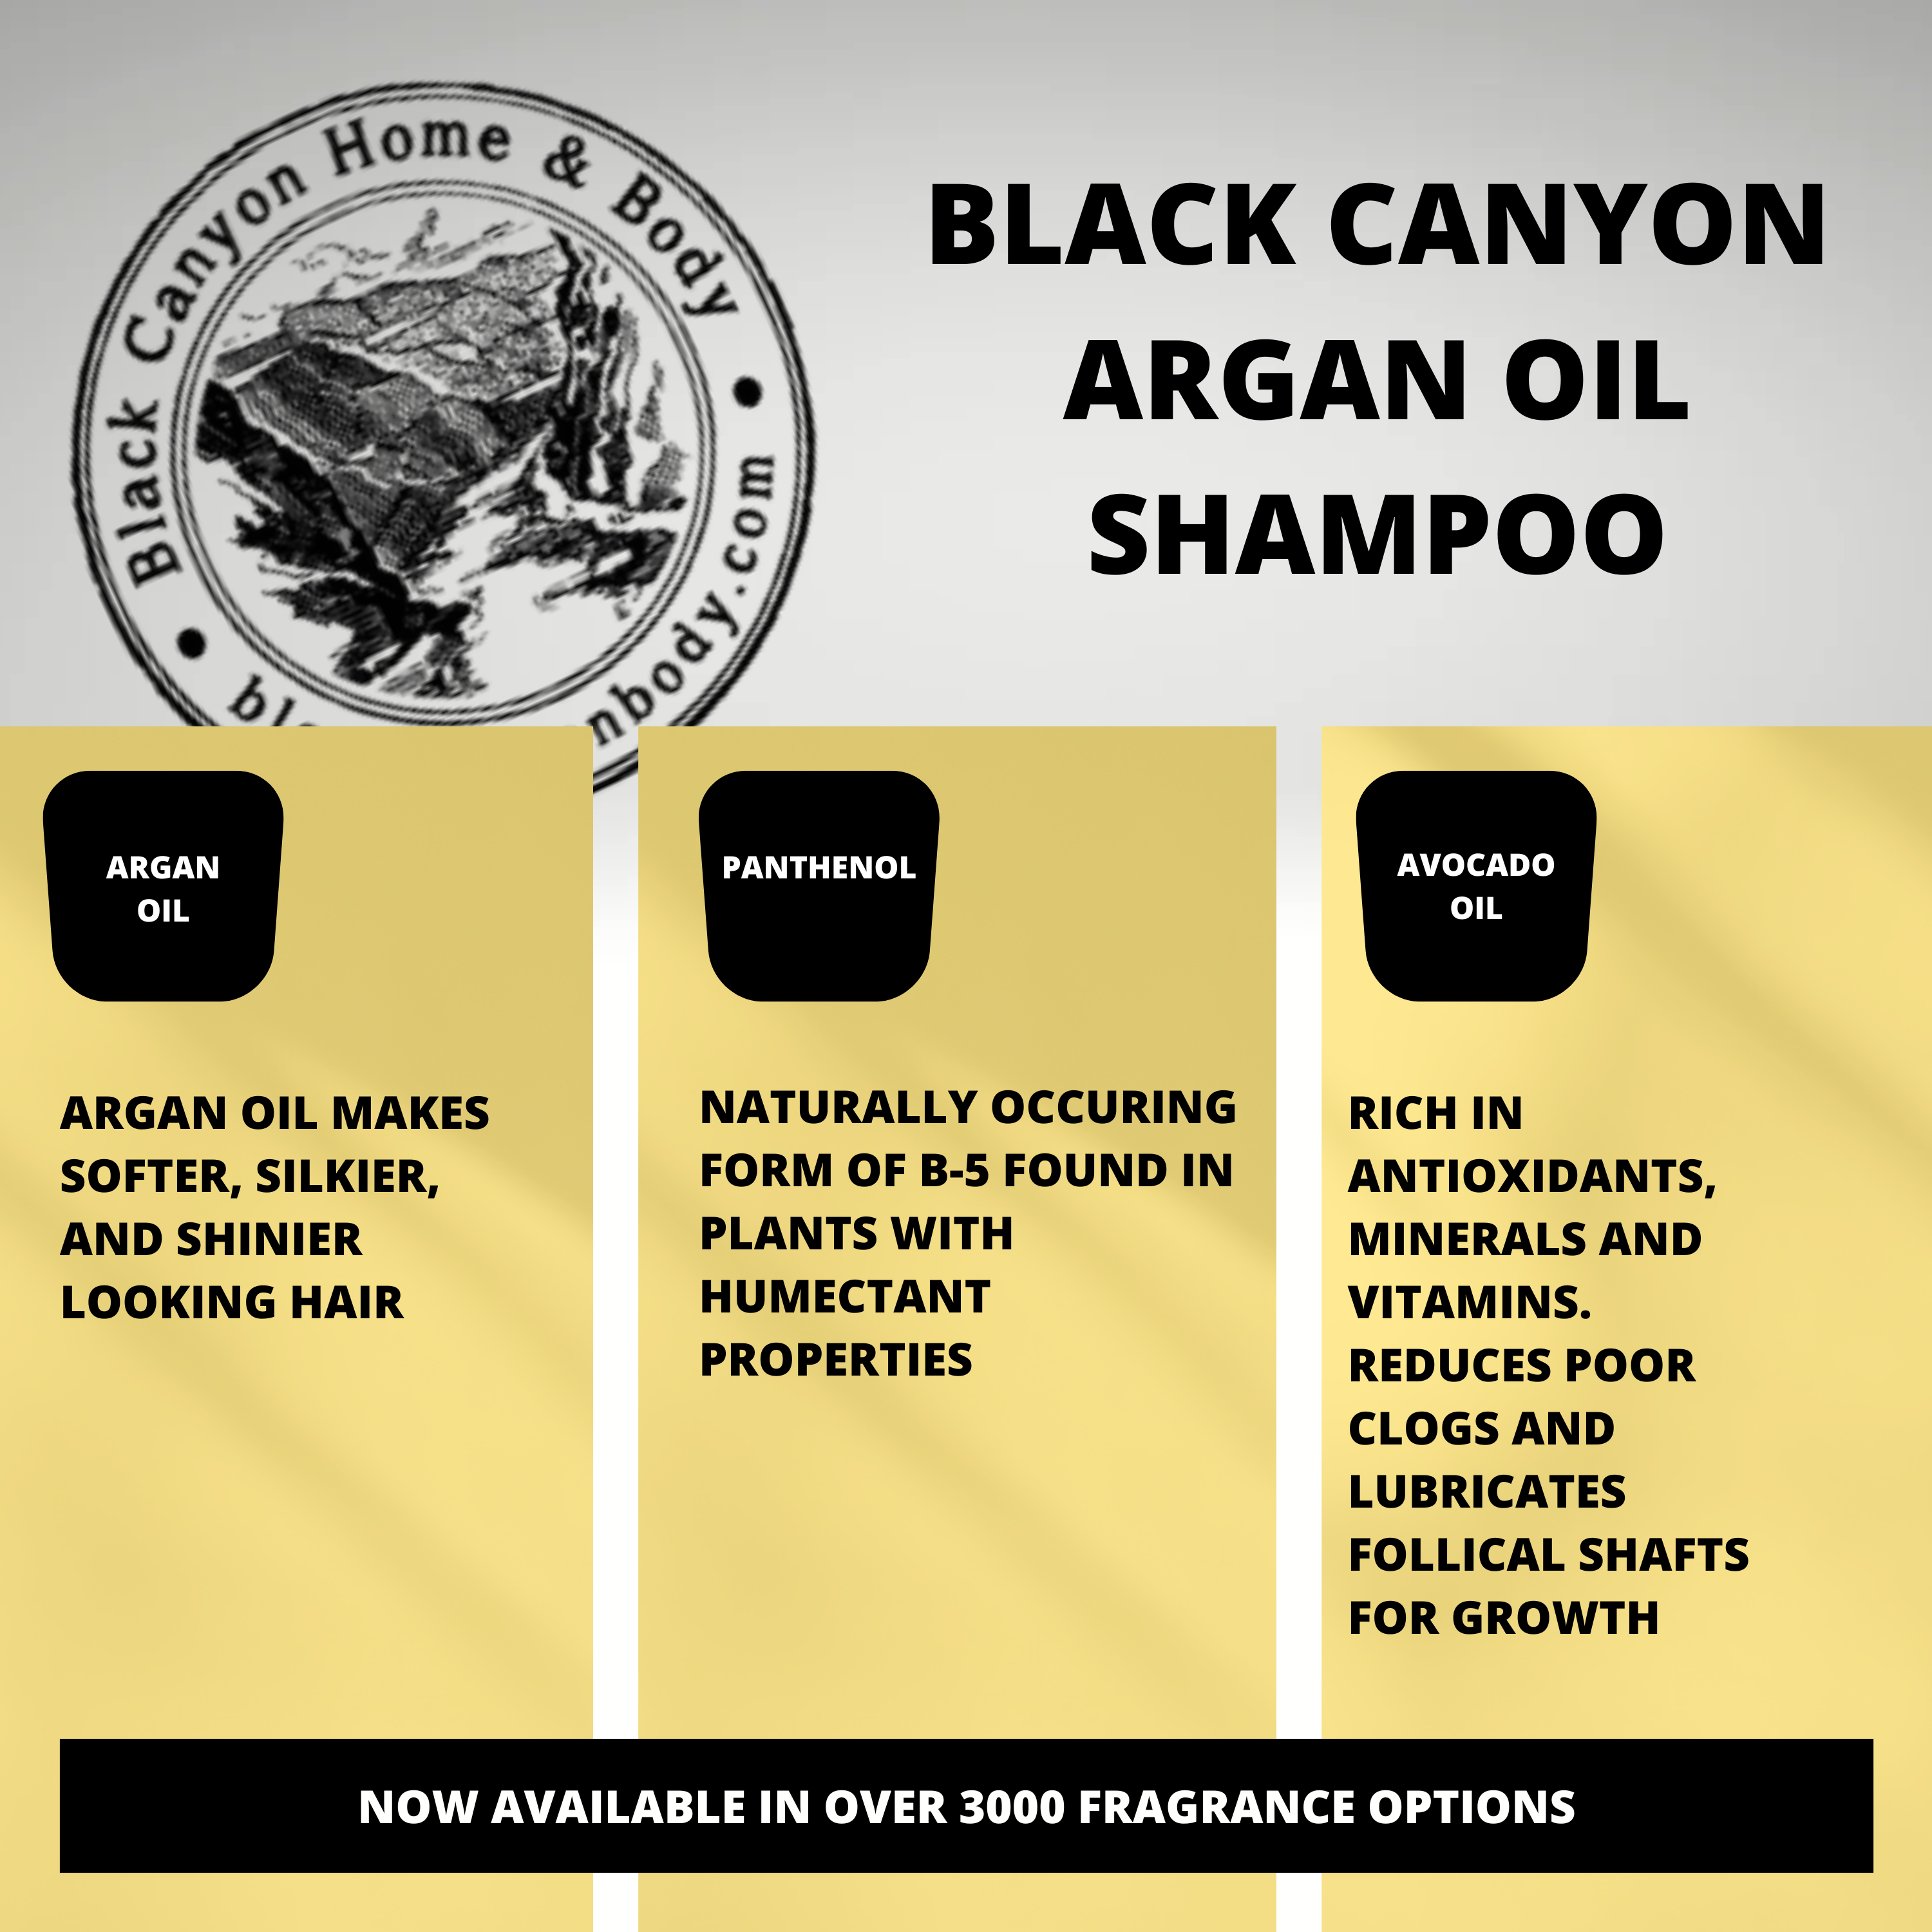 Black Canyon Amber & Lime Scented Shampoo with Argan Oil